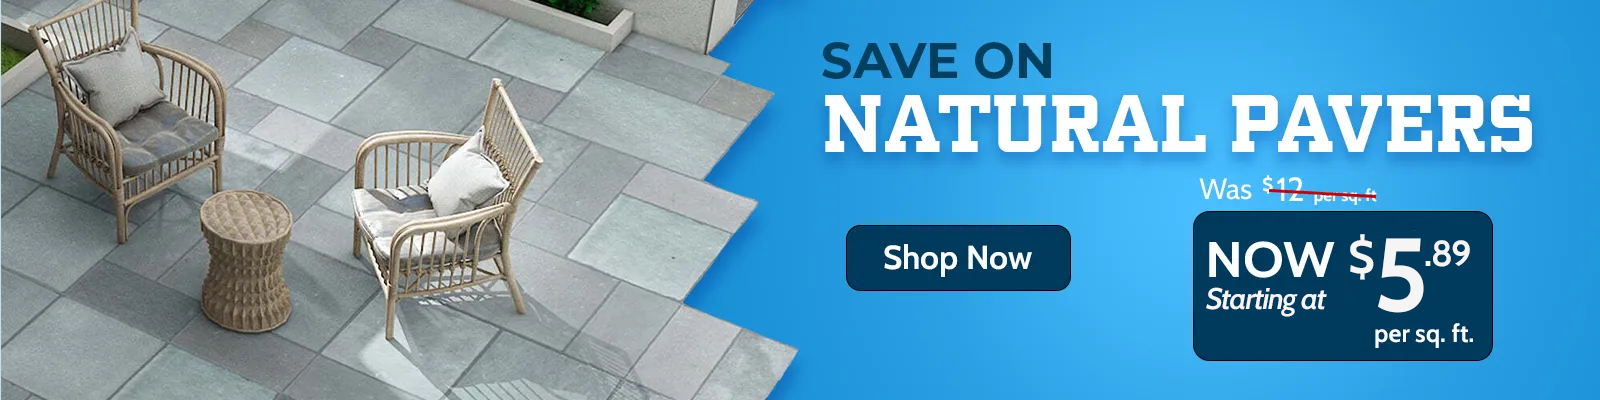 Natural Pavers near me | Shop Online for Delivery